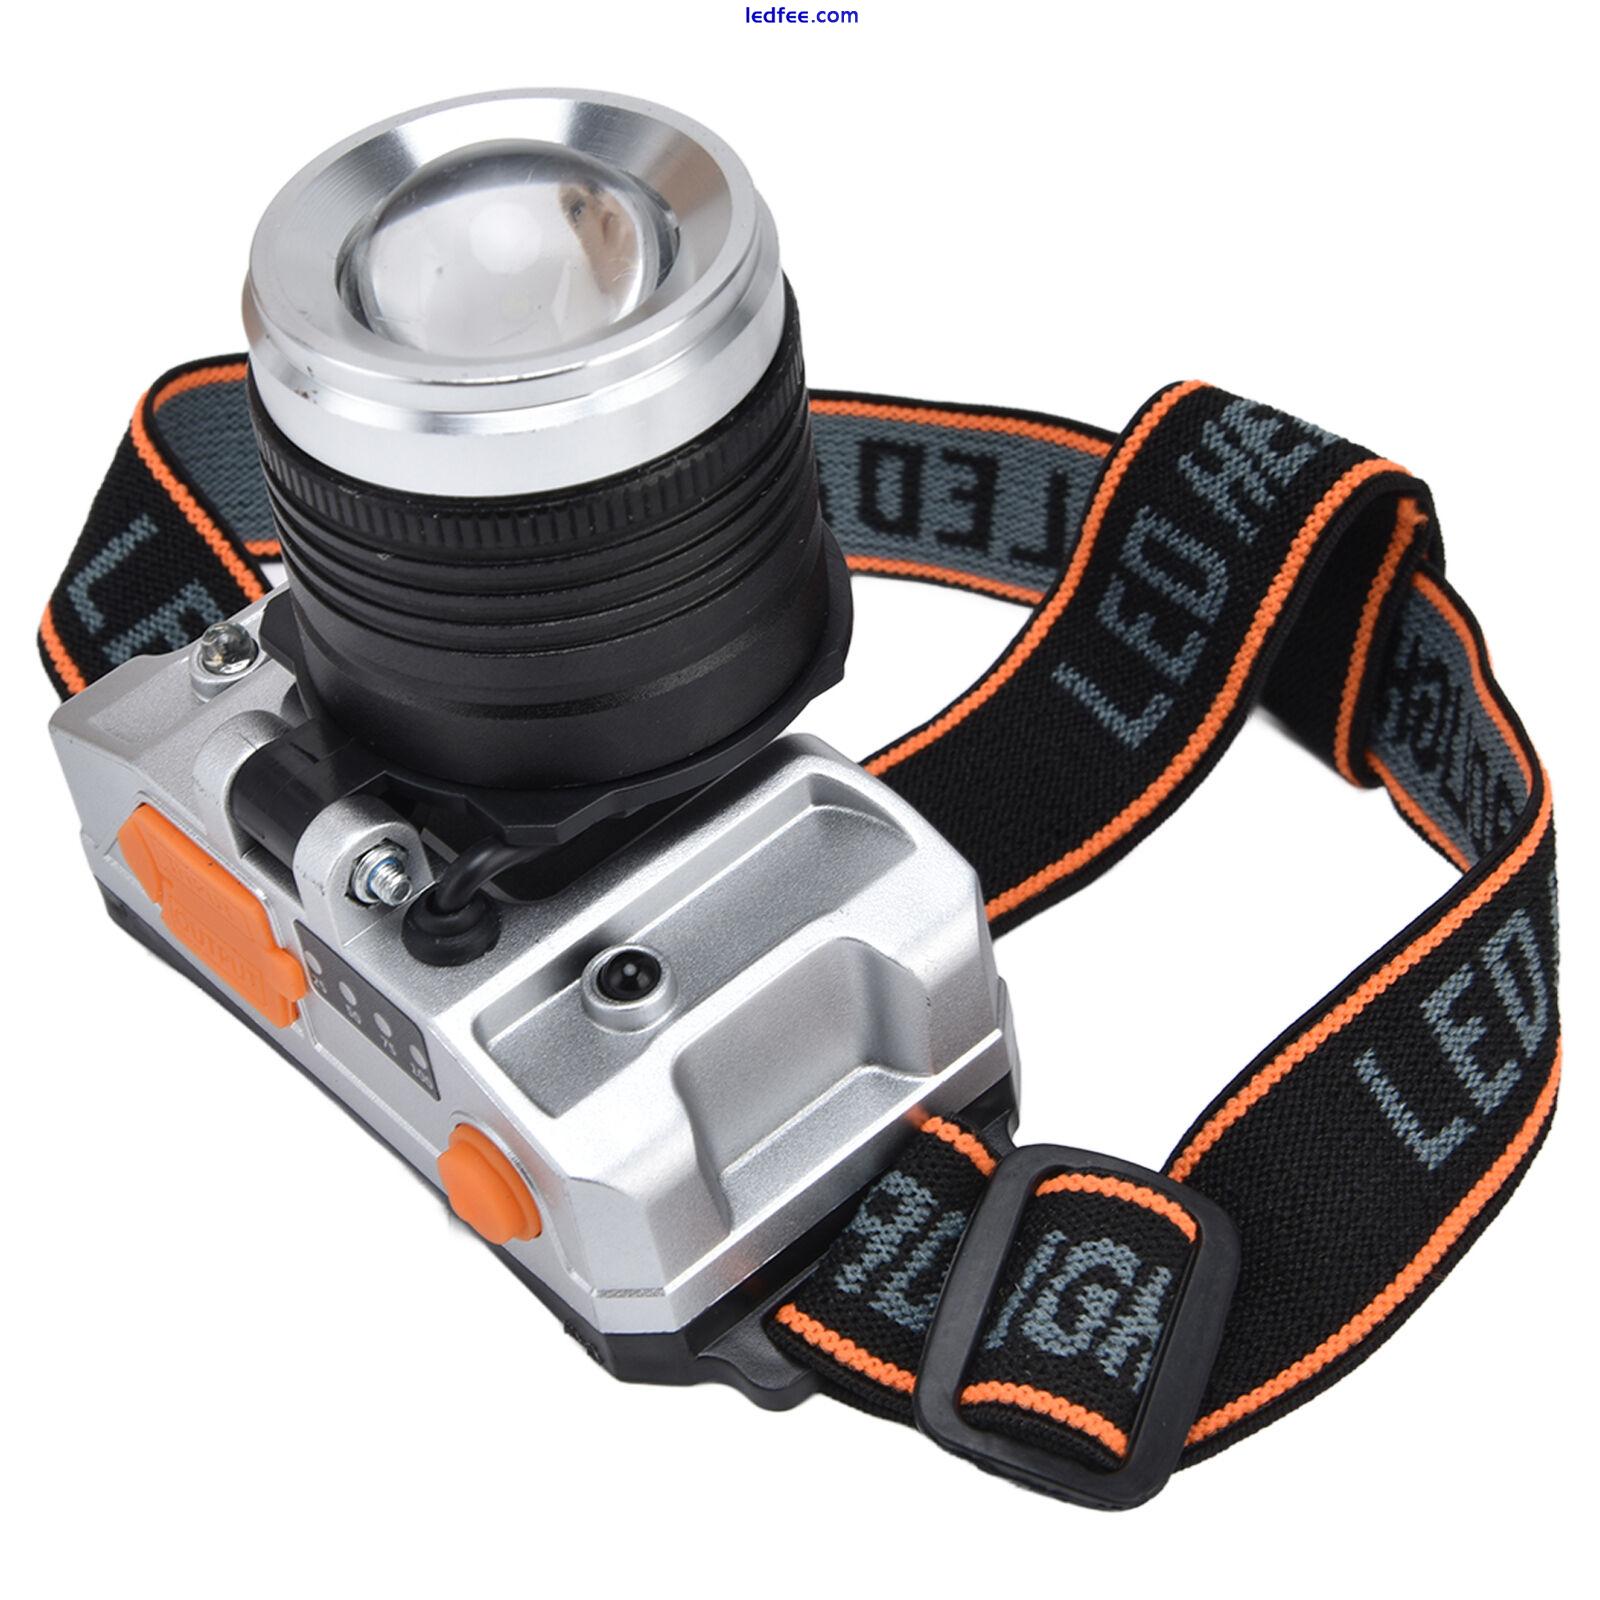 02 015 Zoomable Headlight LED Headlight USB Rechargeable Powerful Light 3 2 